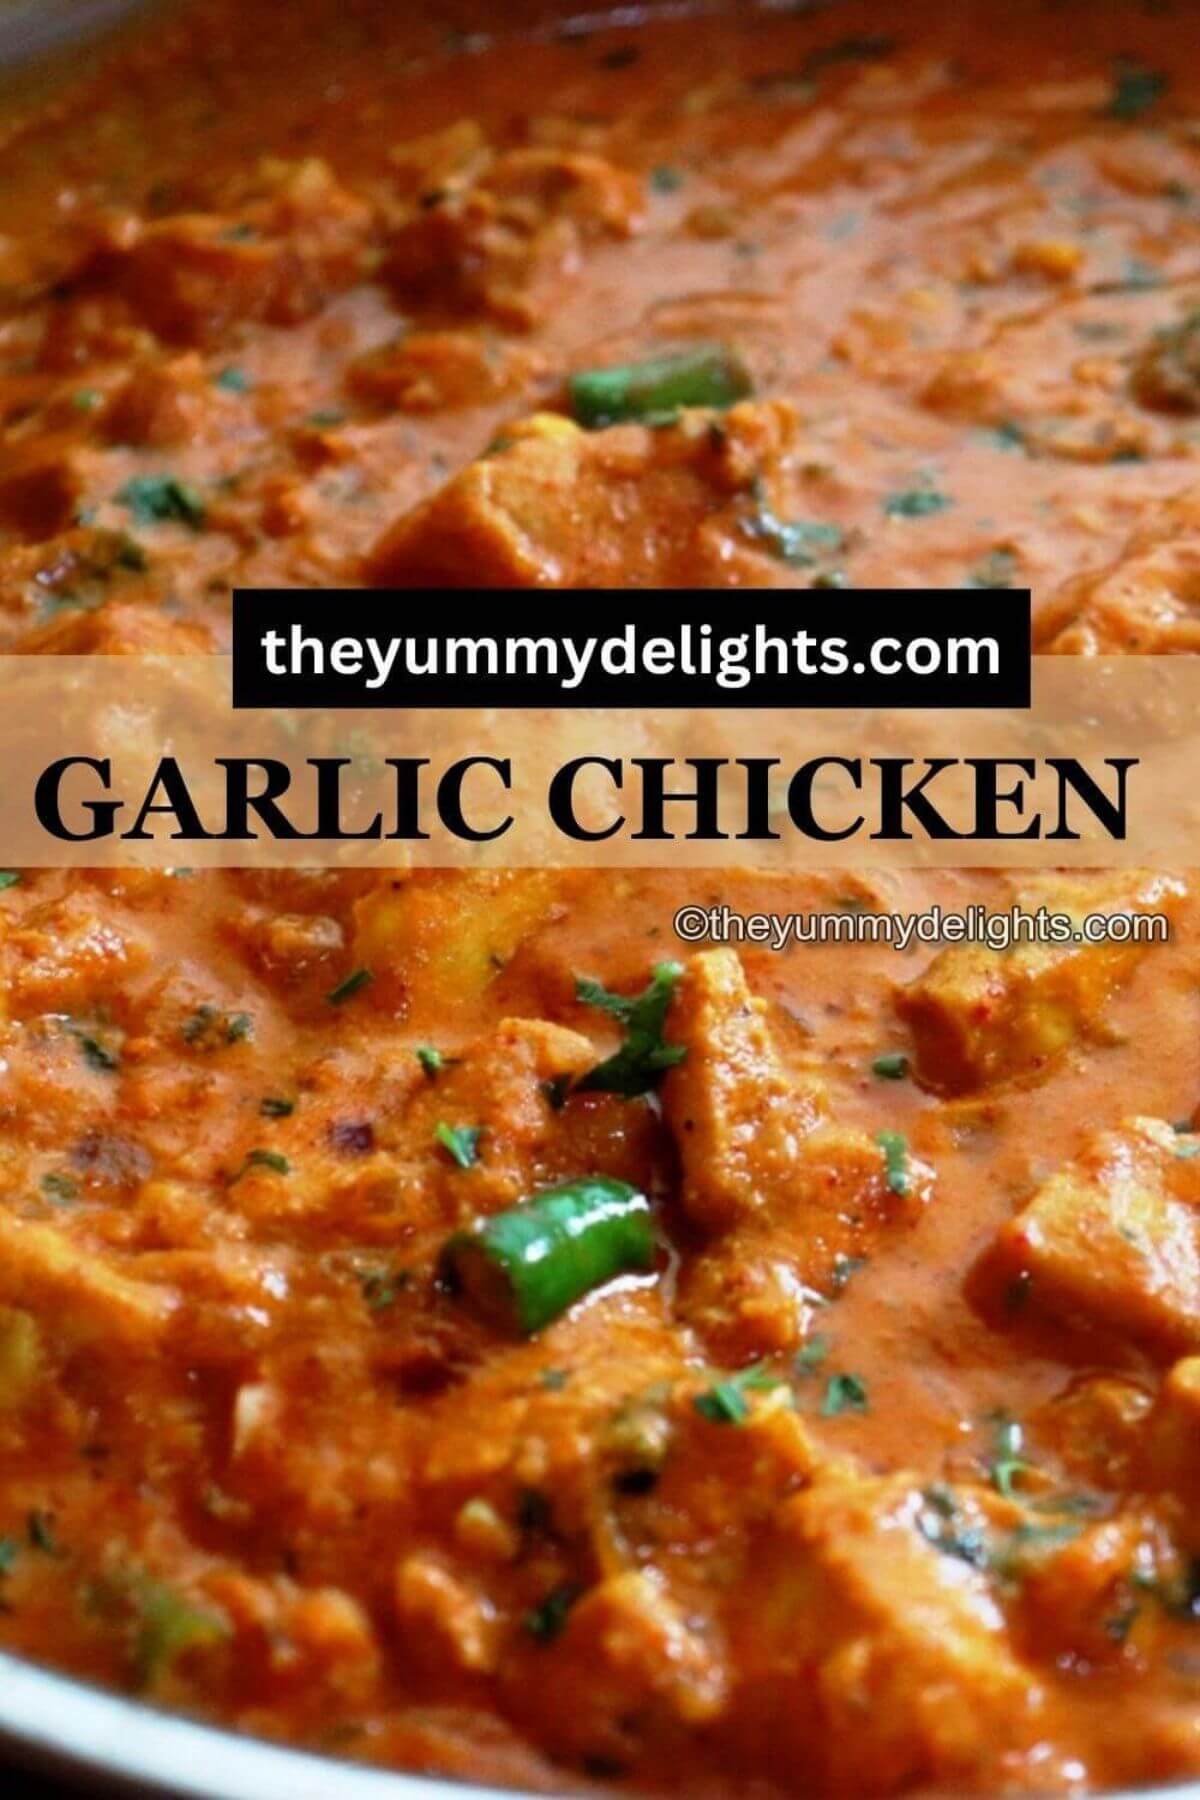 close-up of garlic chicken curry with text overlay.